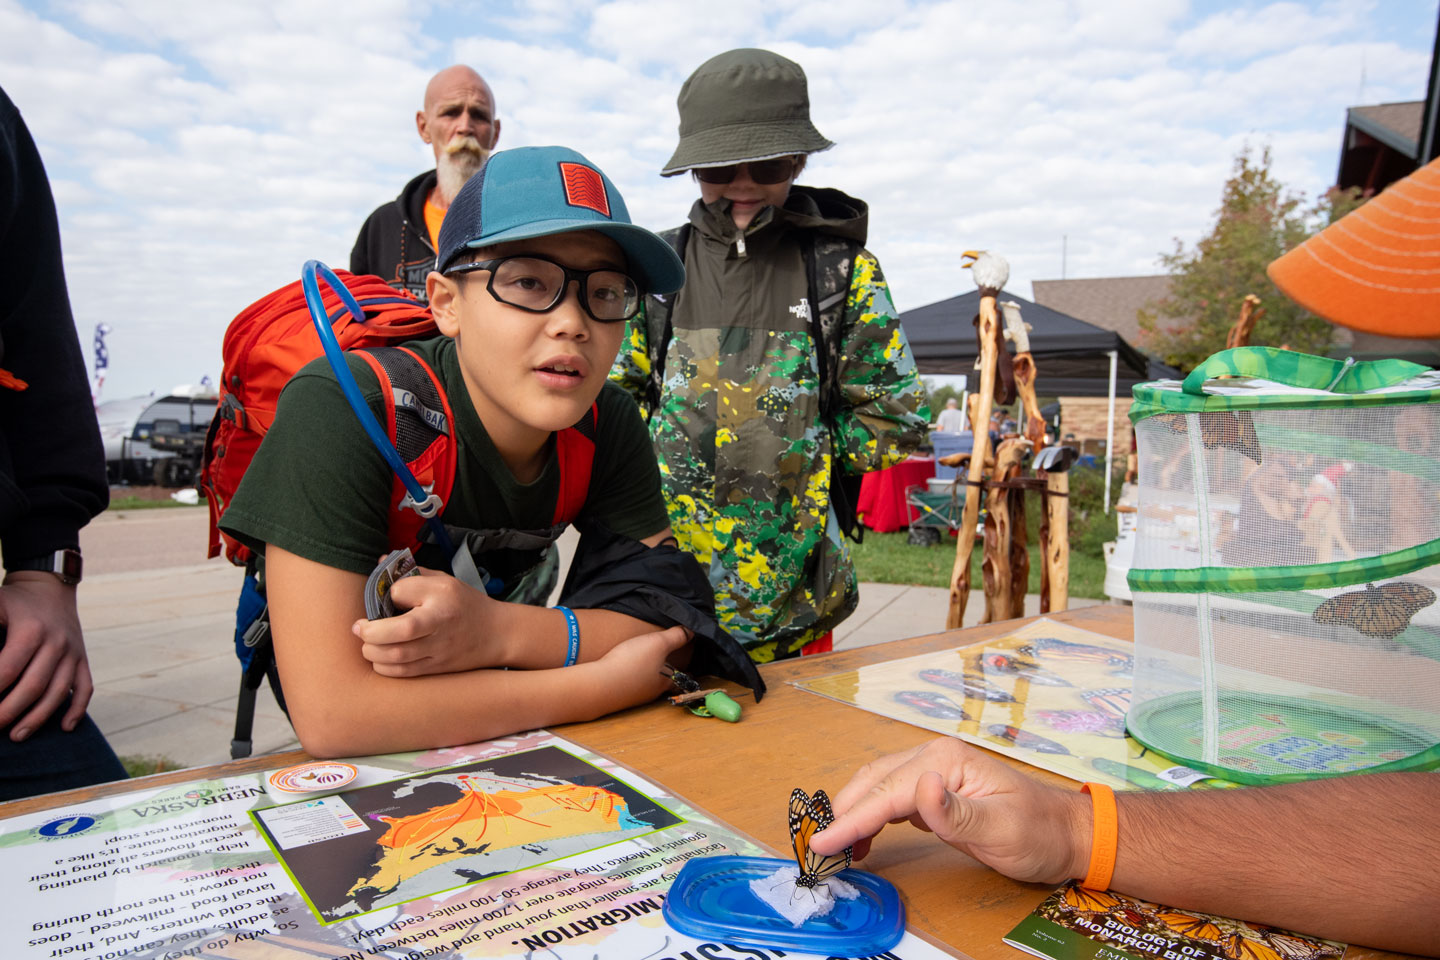 Read More: Catch these Game and Parks education events in June